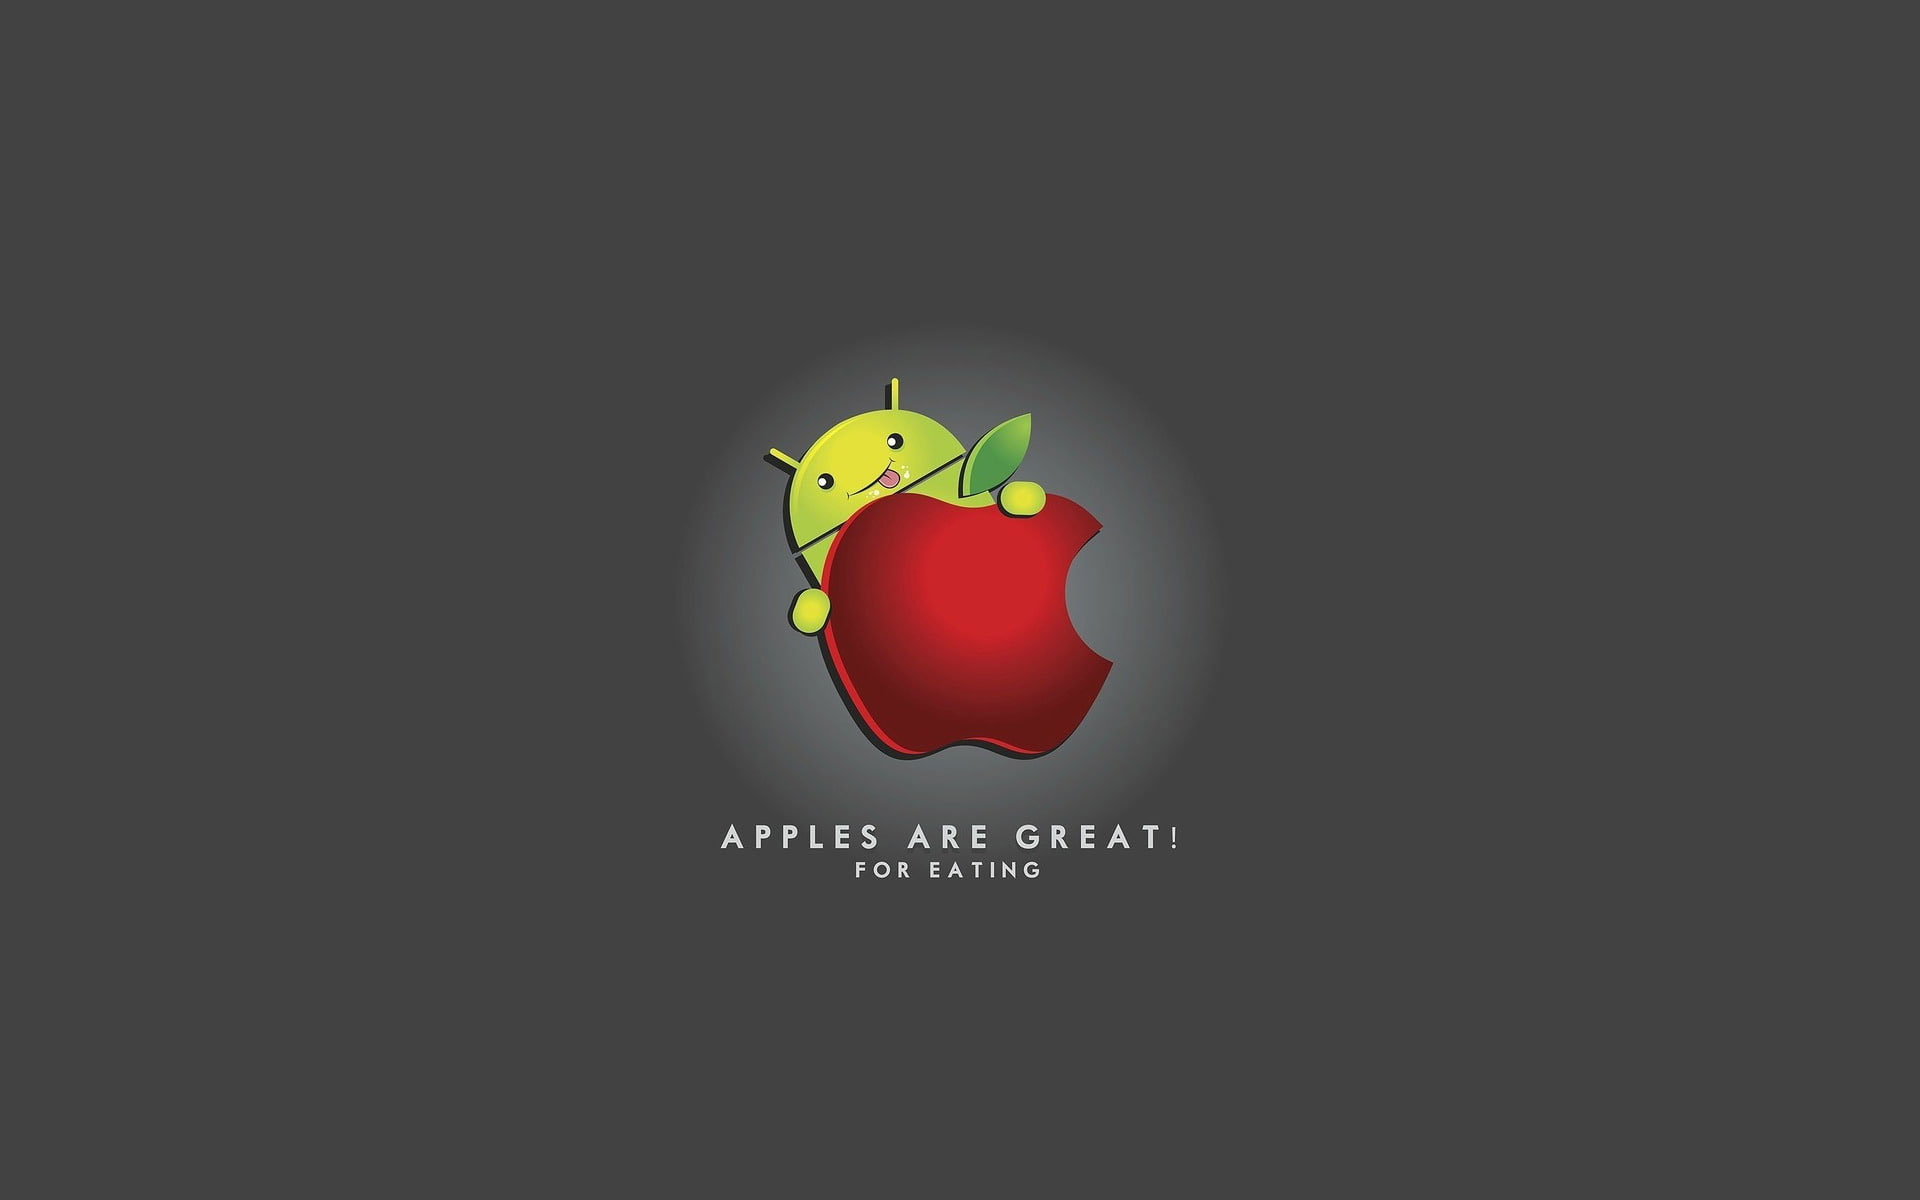 Wallpaper Android And Apple, Android Logo, Funny, Apple Logo - Wallpaperforu